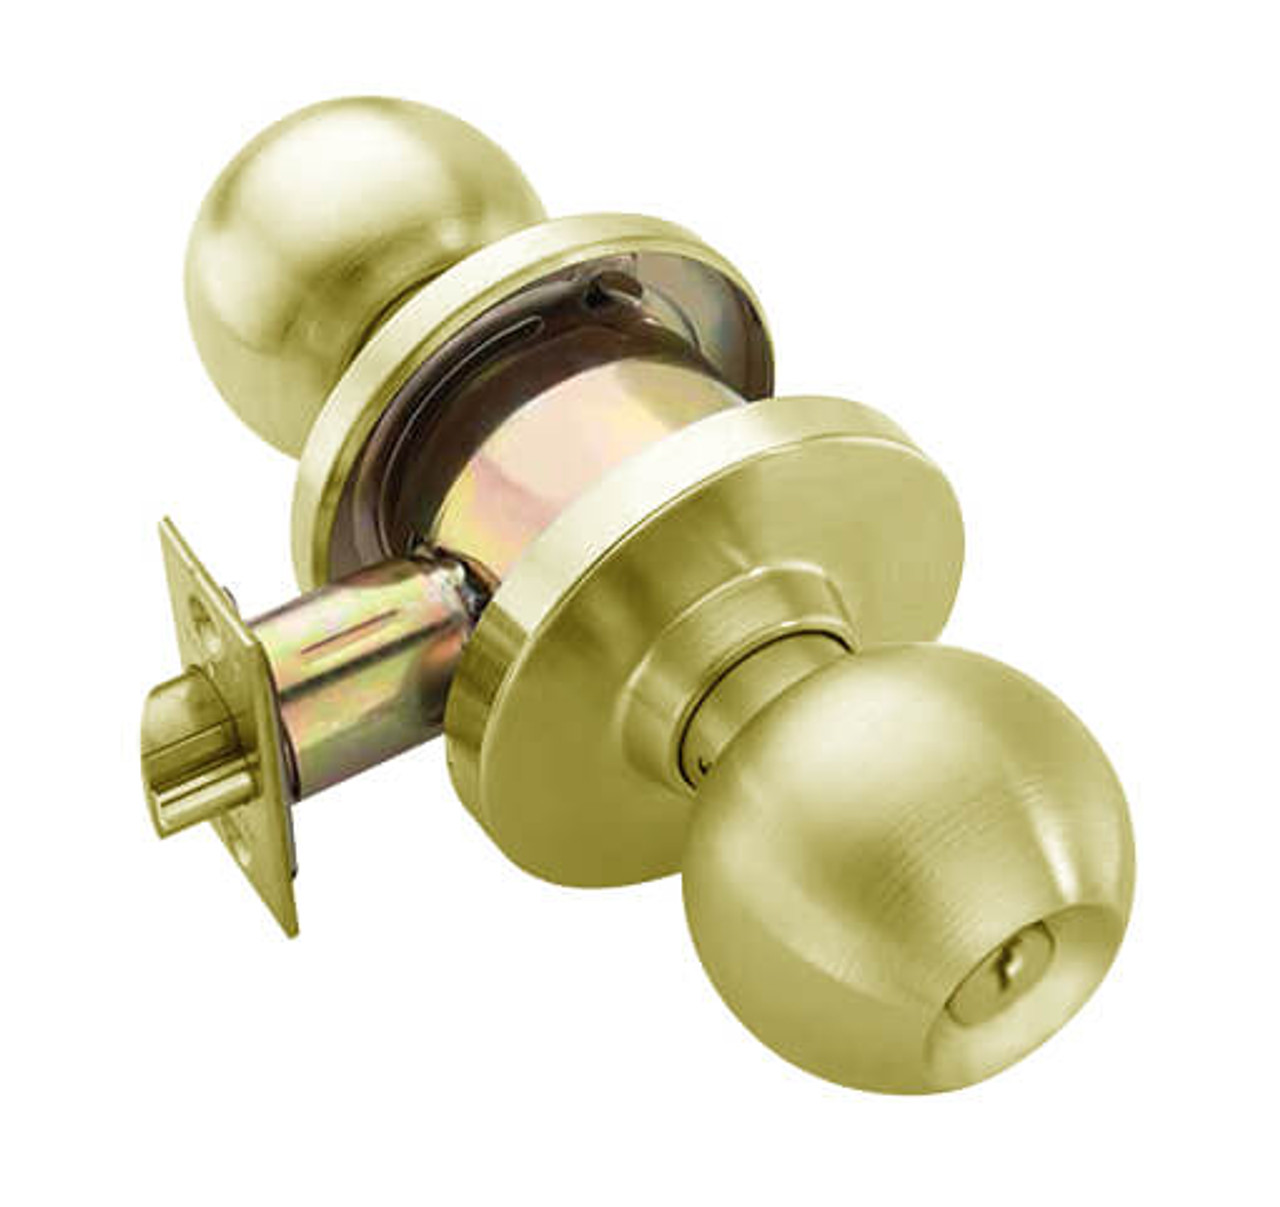 W711PD-H-606 Falcon W Series Cylindrical Apartment Entry Lock with Hana Knob Style in Satin Brass Finish